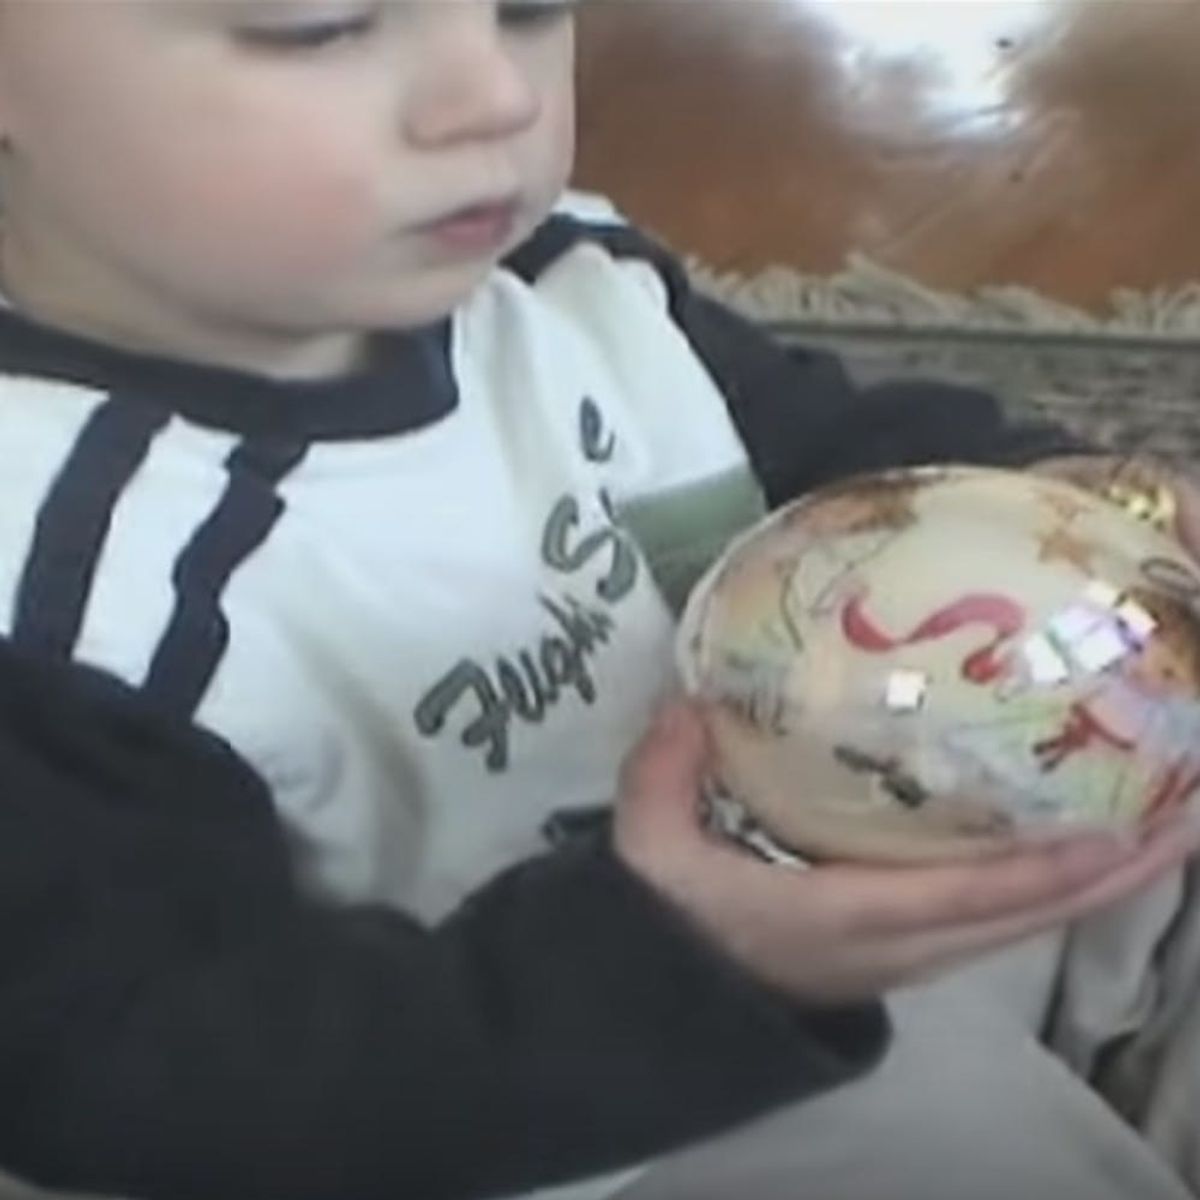 This Toddler Just Had the Most Hilarious Christmas Fail Ever